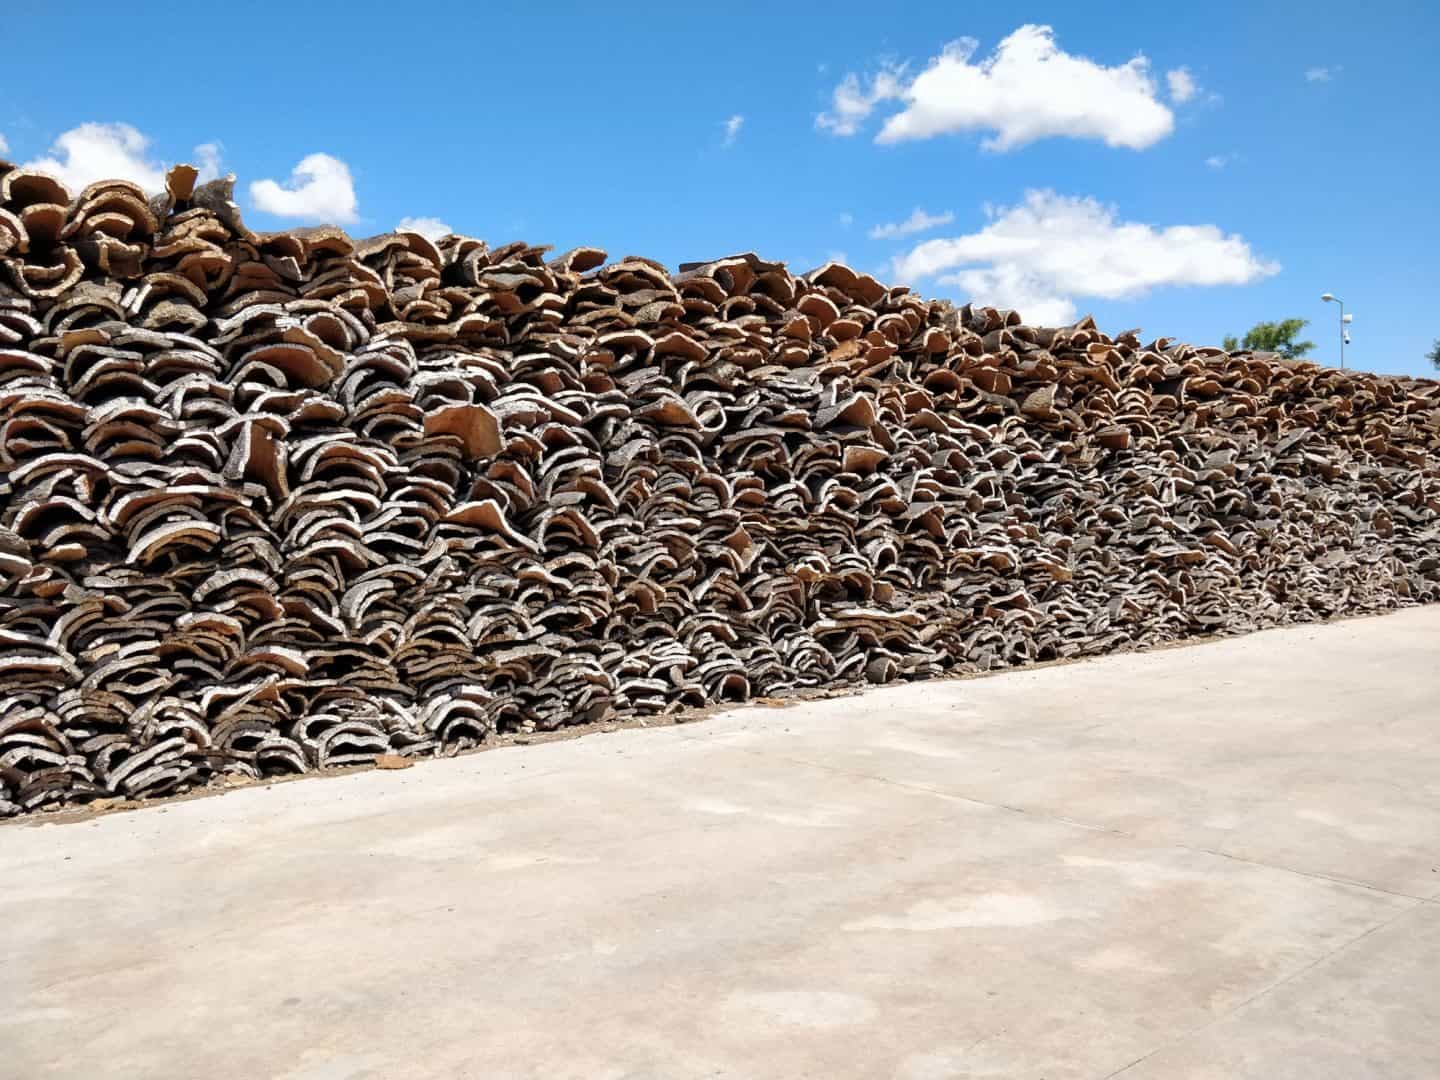 Cork is stored outside for 6 months to a year before it can be used in the cork production process